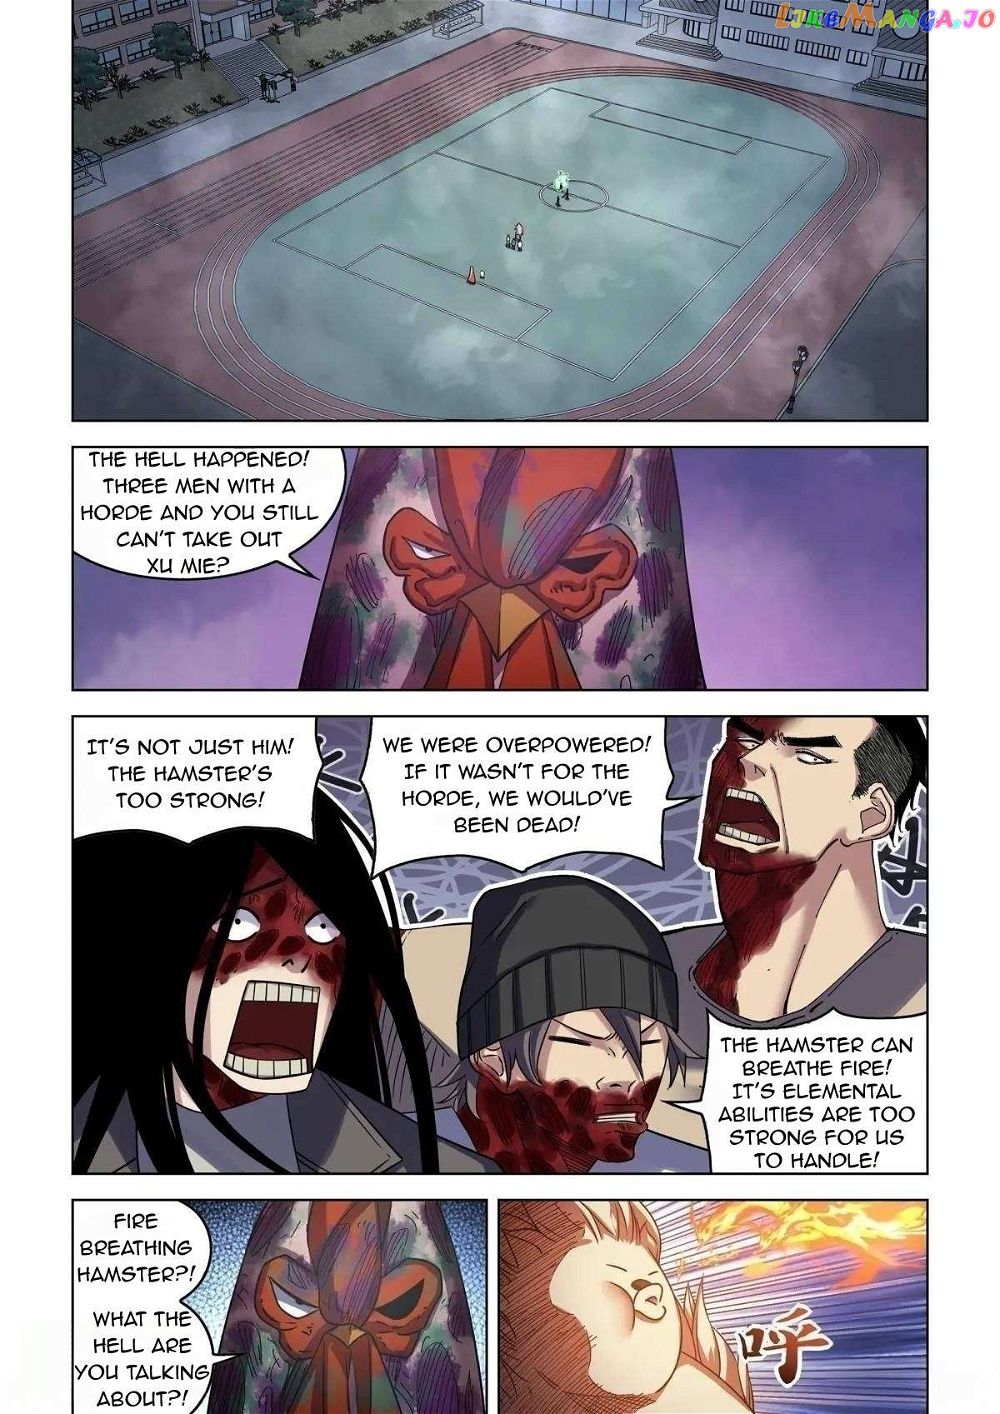 The Last Human Chapter 554 - Page 2